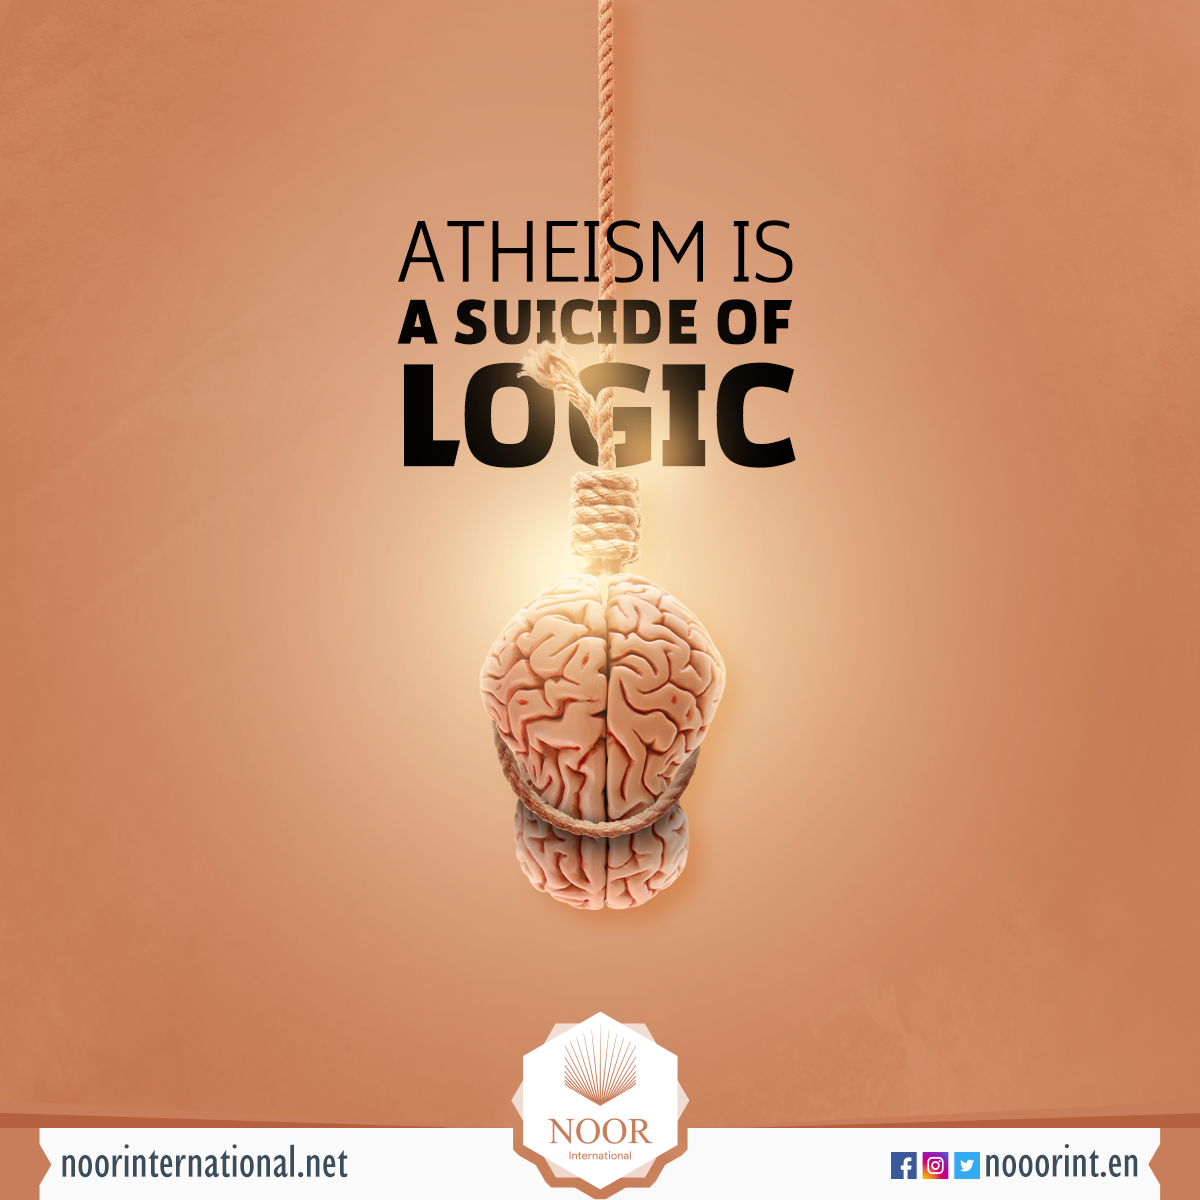 Atheism is a suicide of logic